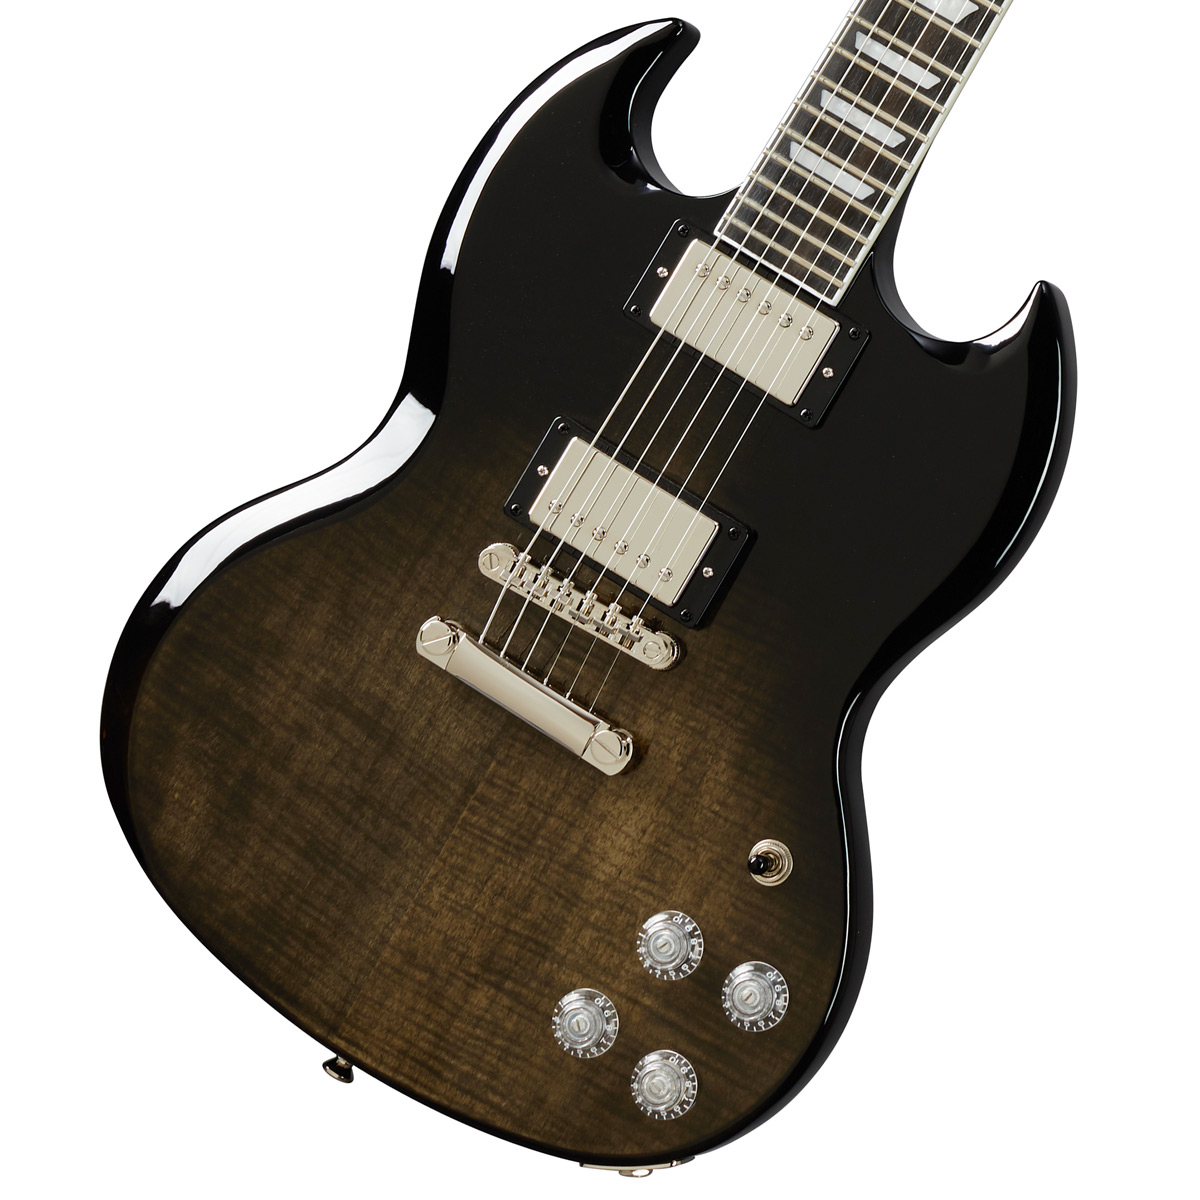 Epiphone / Inspired by Gibson SG Modern Figured Trans Black Faded エピフォン